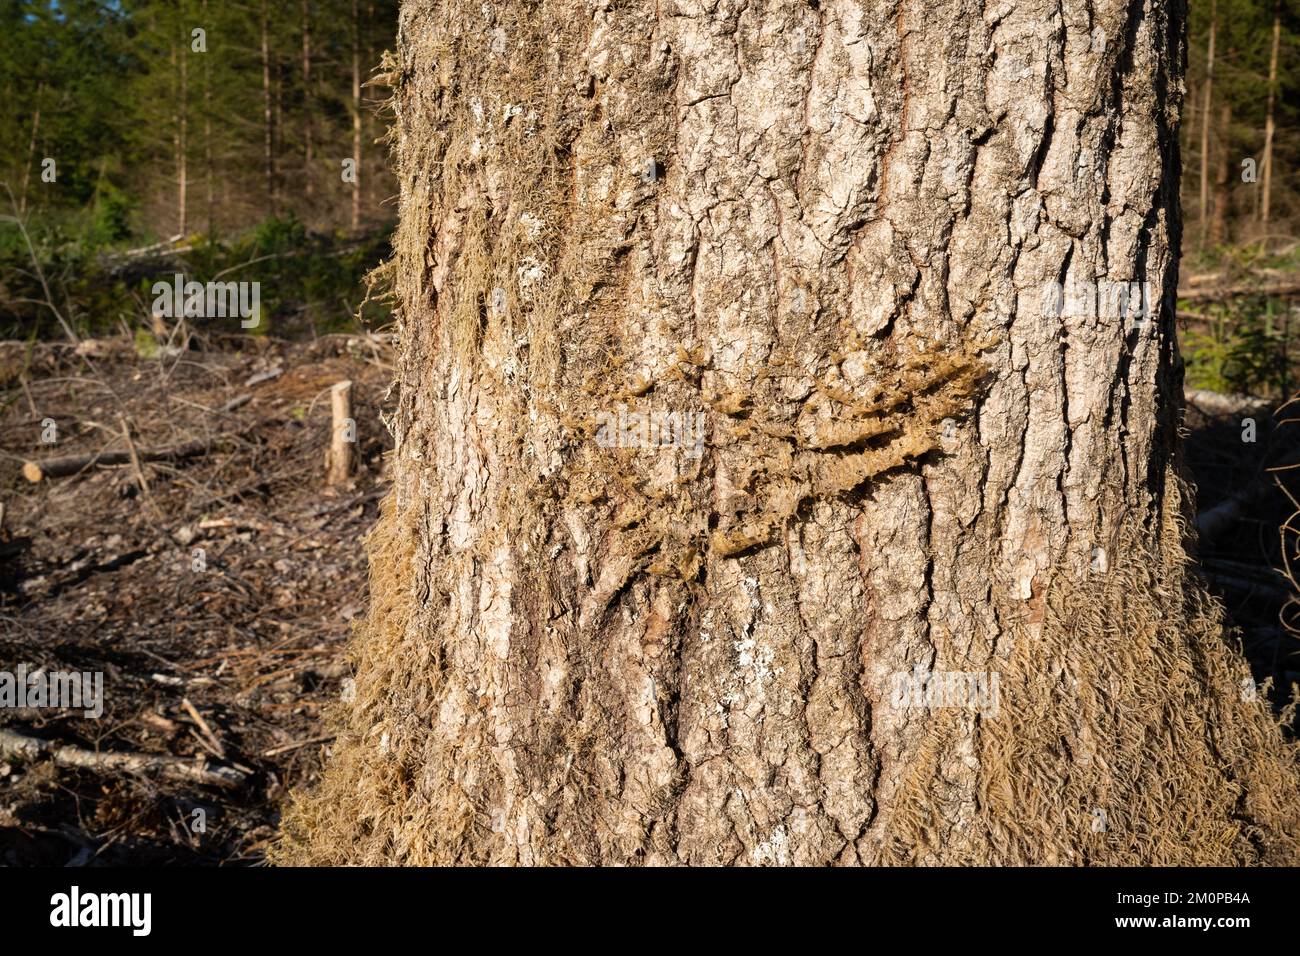 A dried Shingle moss on a large Aspen tree after clear-cutting in Estonia, Northern Europe Stock Photo